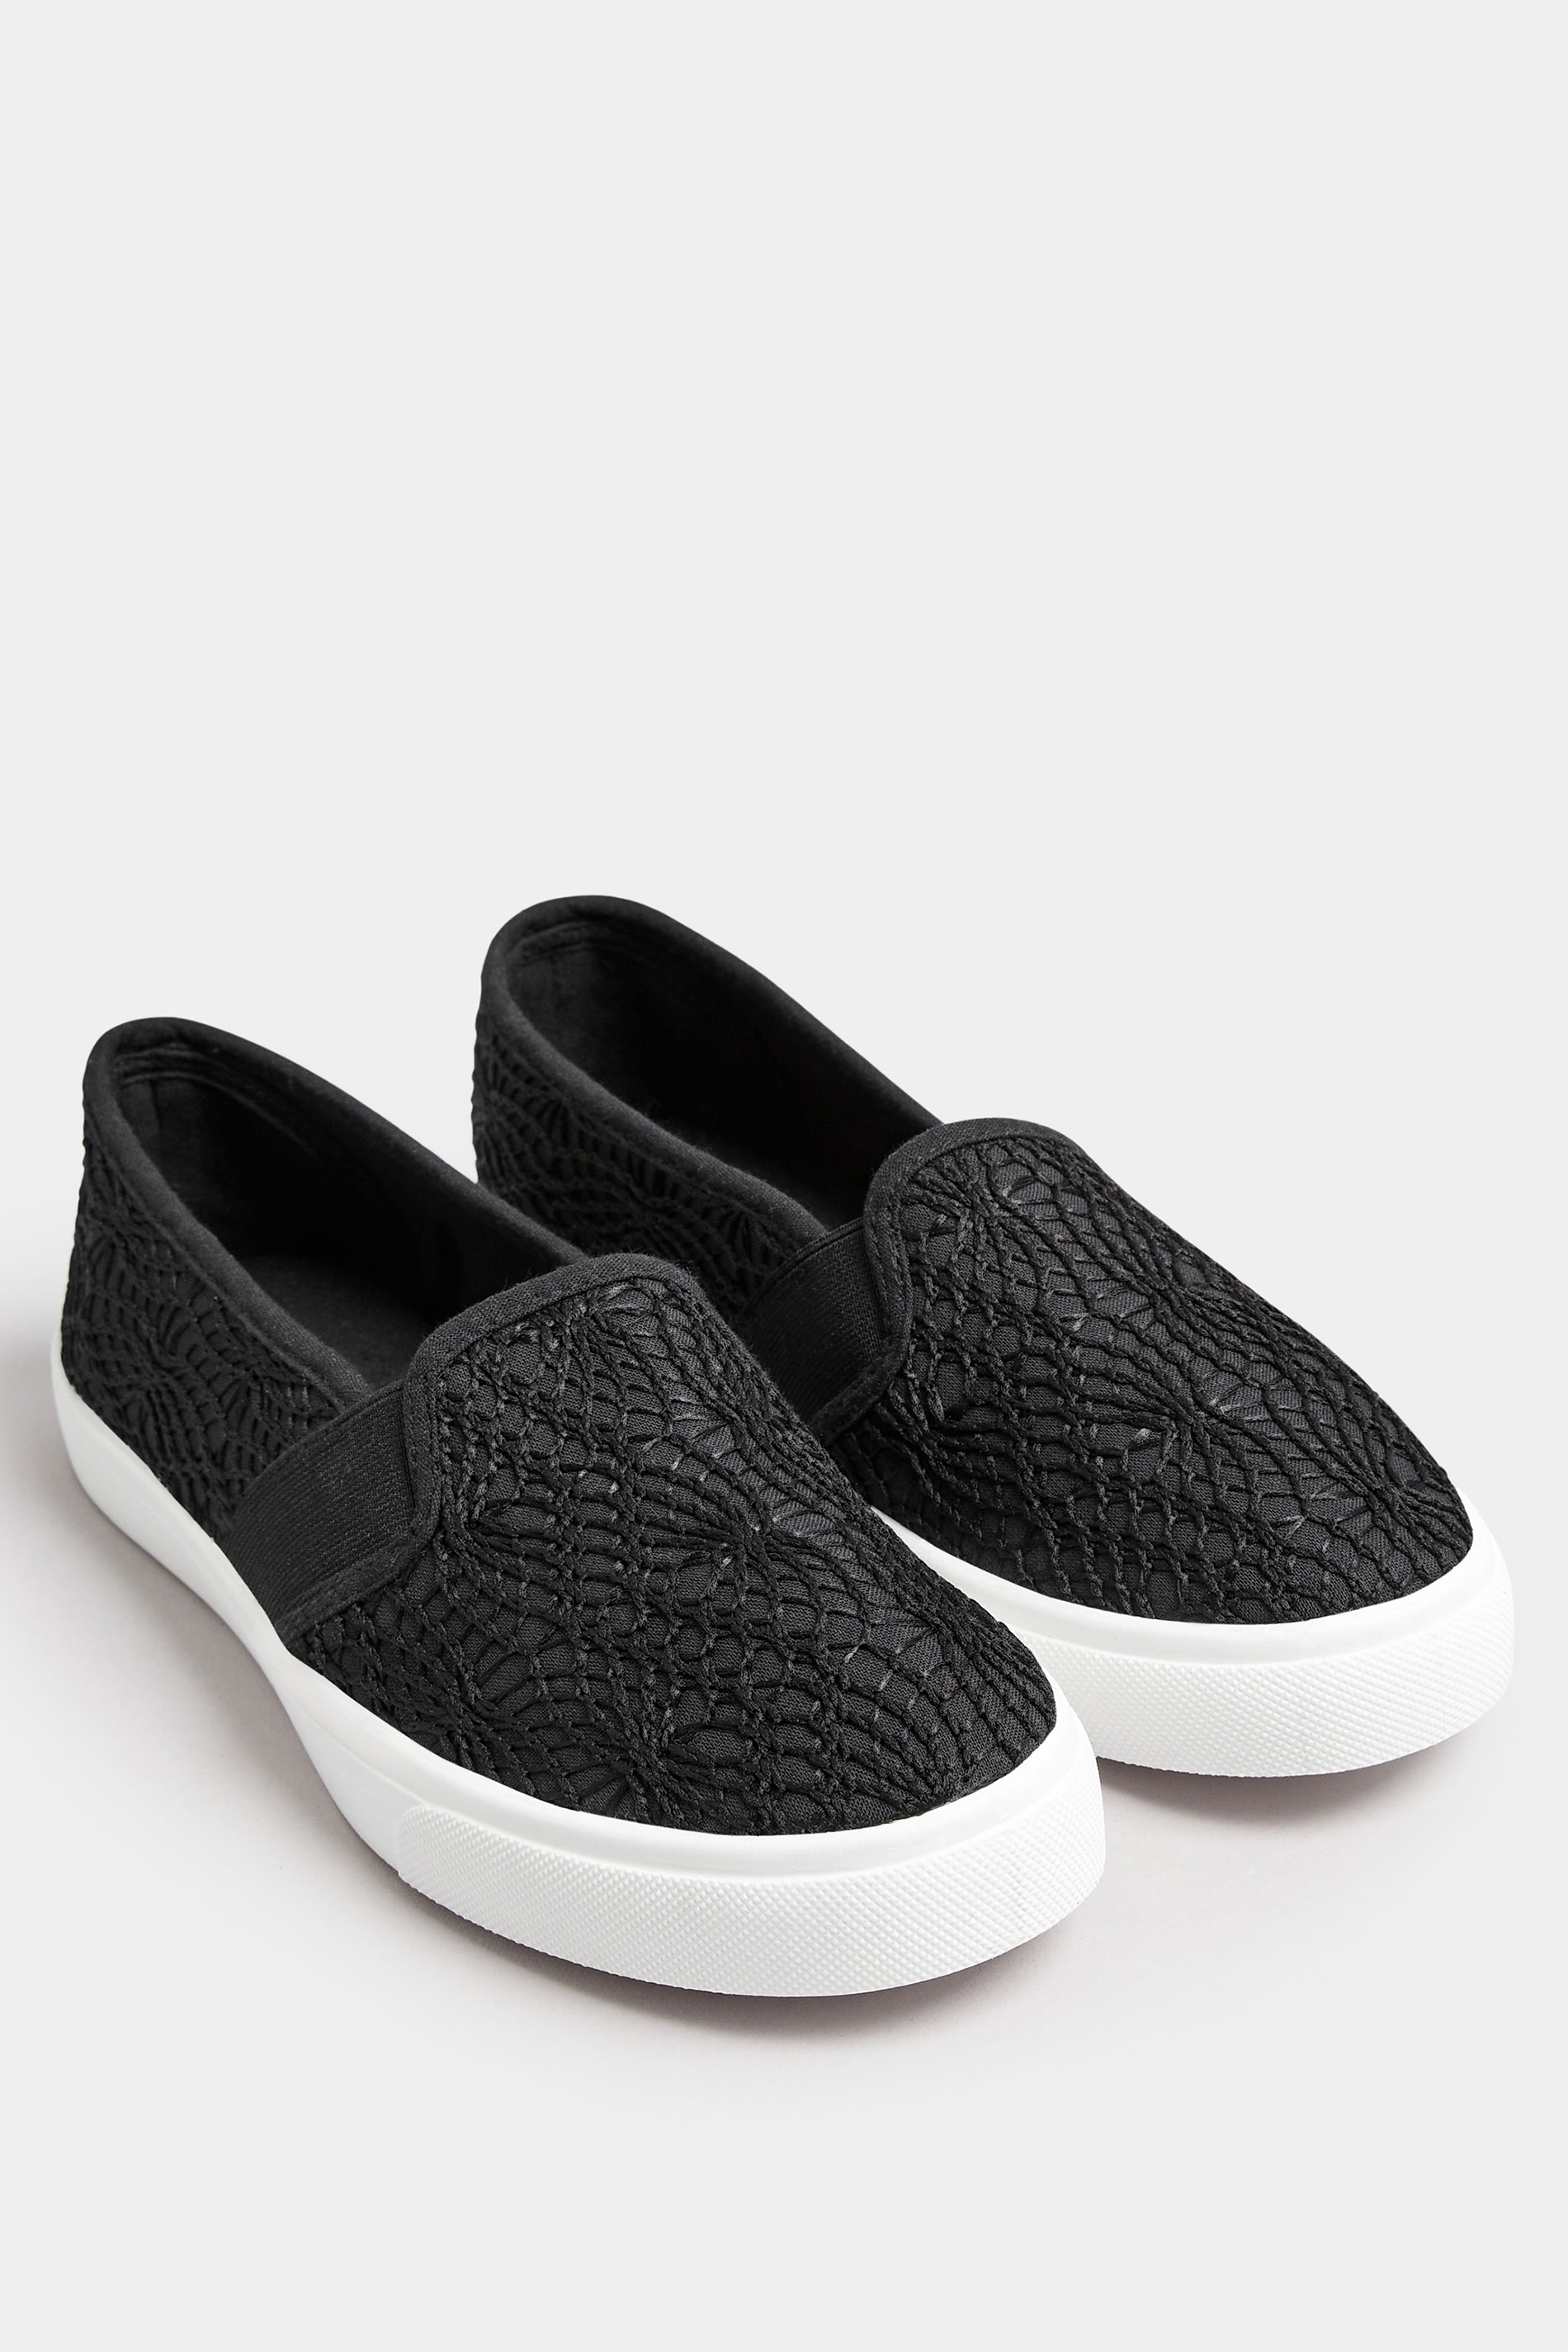 Black Broderie Anglaise Slip-On Trainers In Wide E Fit | Yours Clothing 2